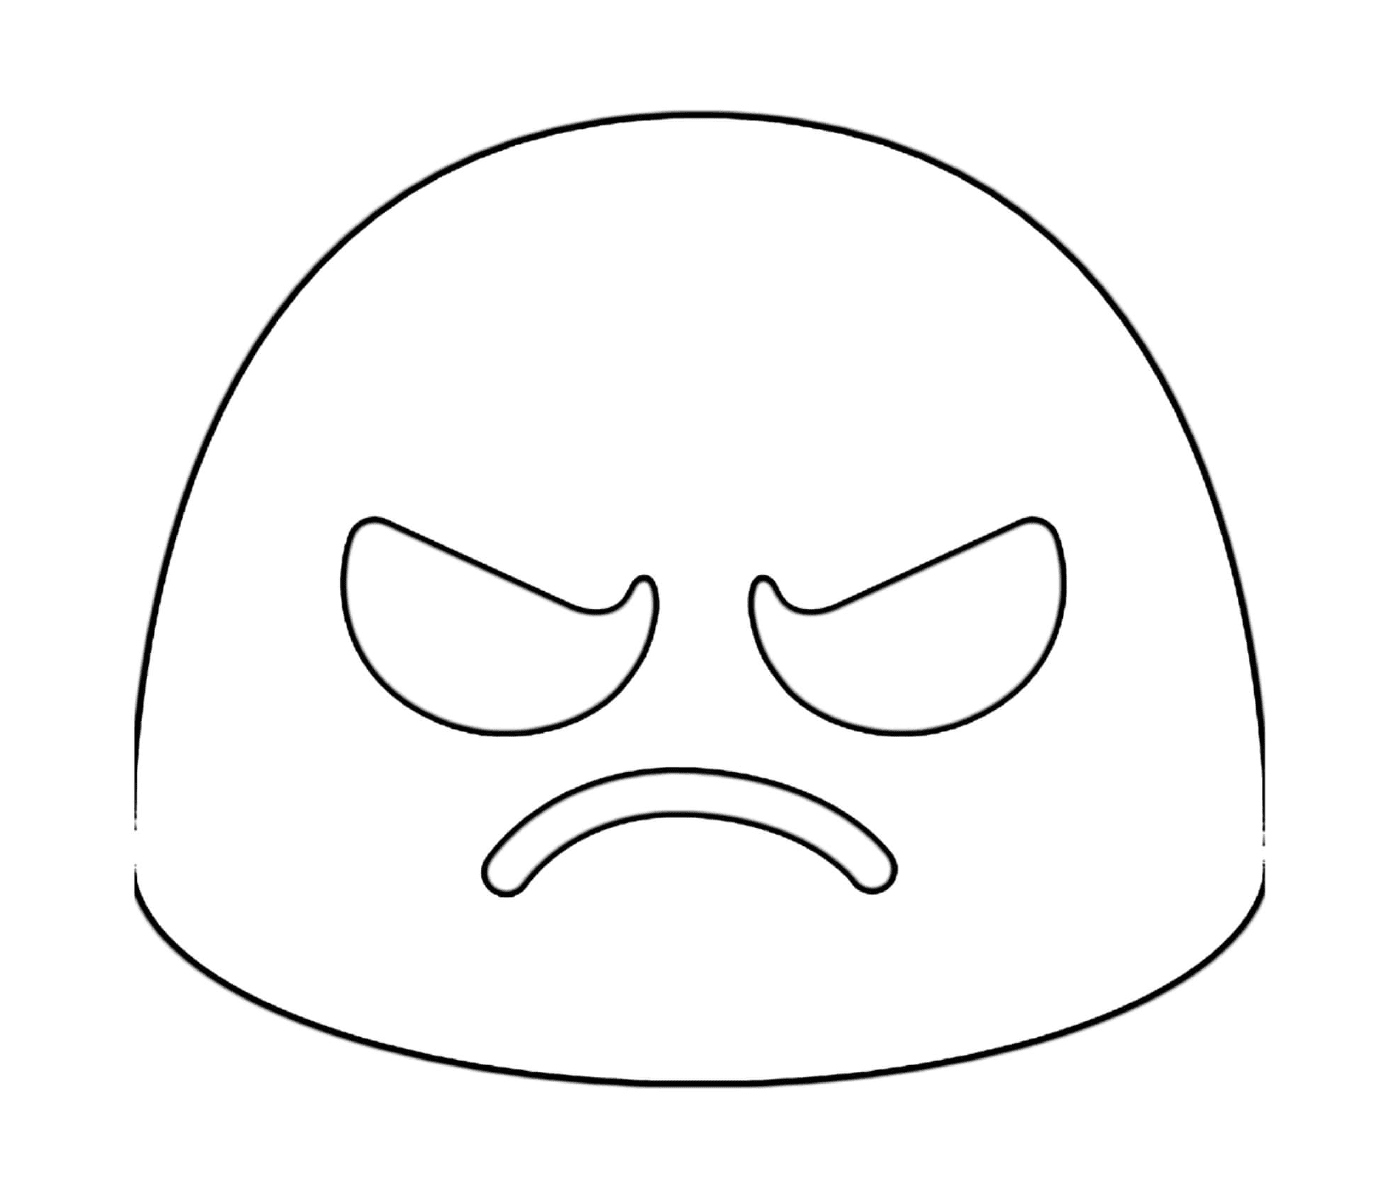  An angry face 